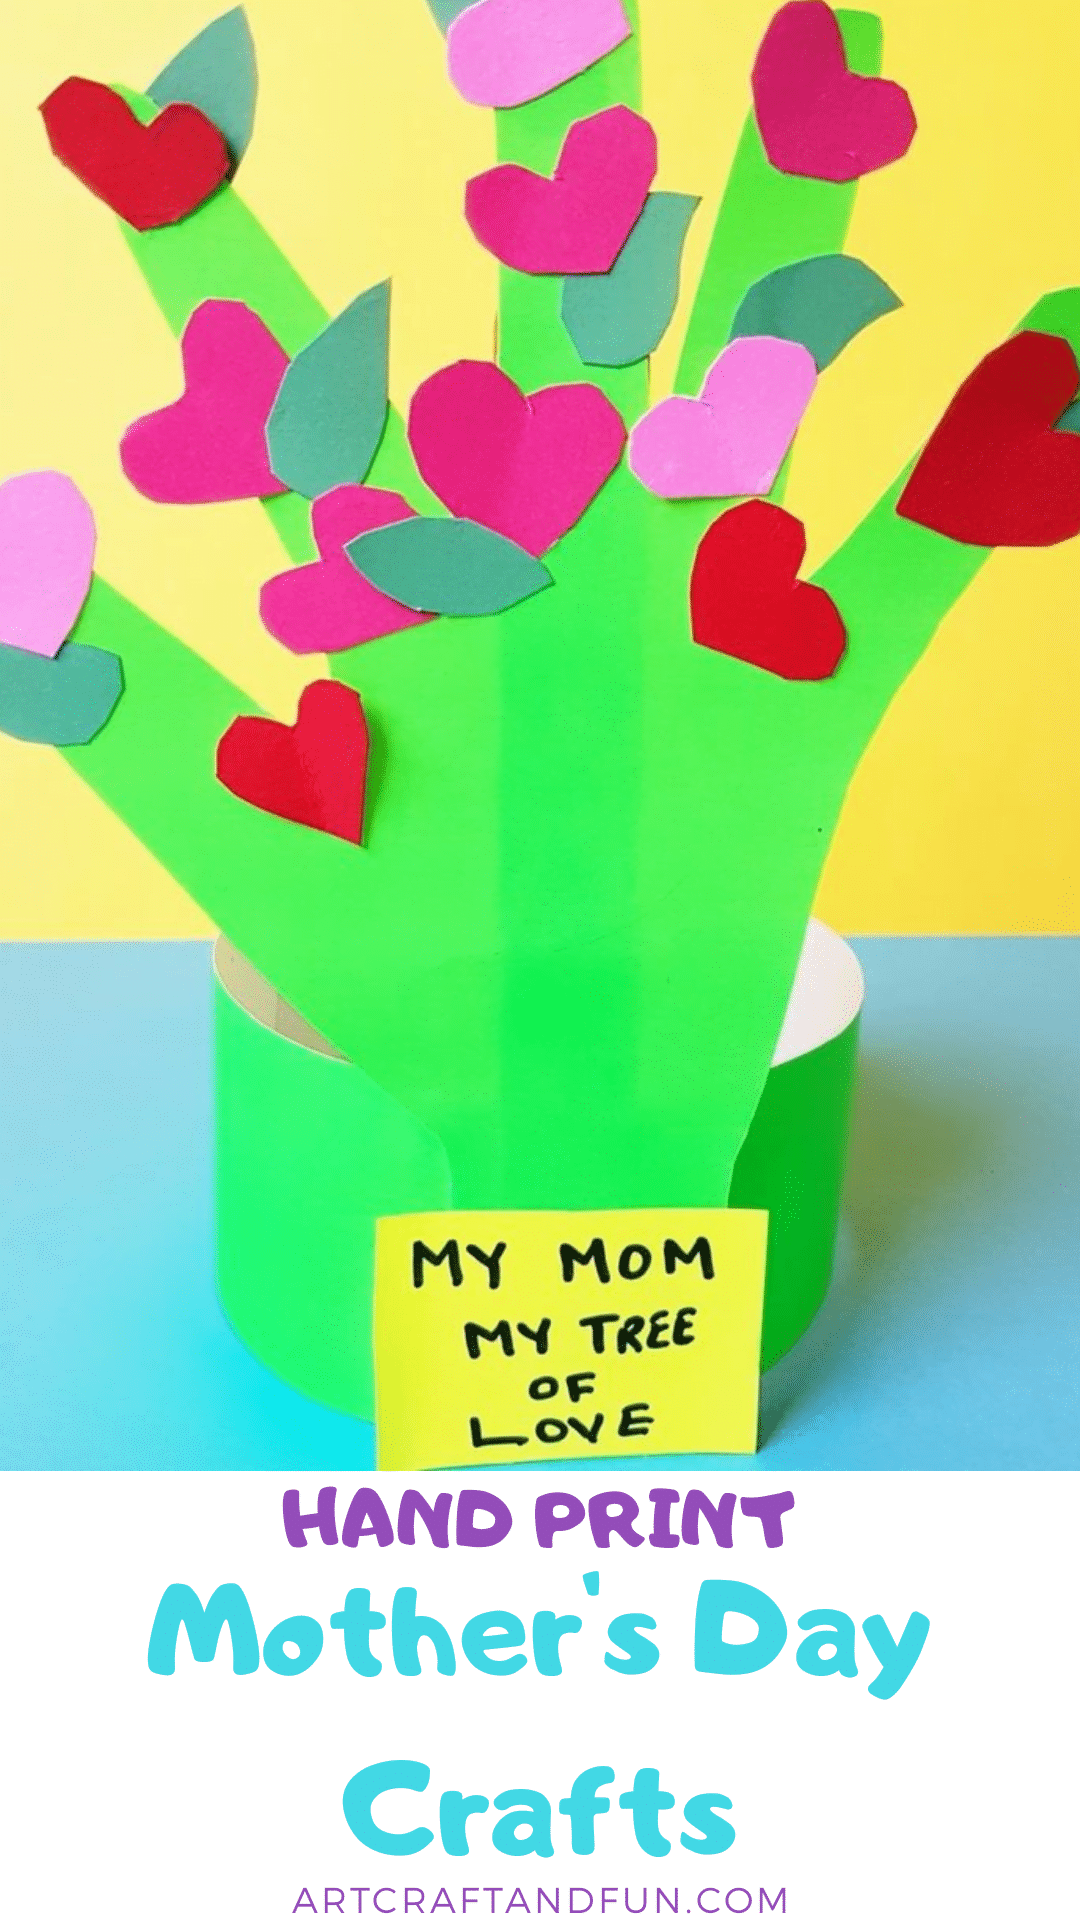 Make this easy hand print mother's day craft with your little one. Perfect for Toddlers and preschoolers. #mothersdaycraft #handprintcraft #toddlercraft #preachoolcrafts